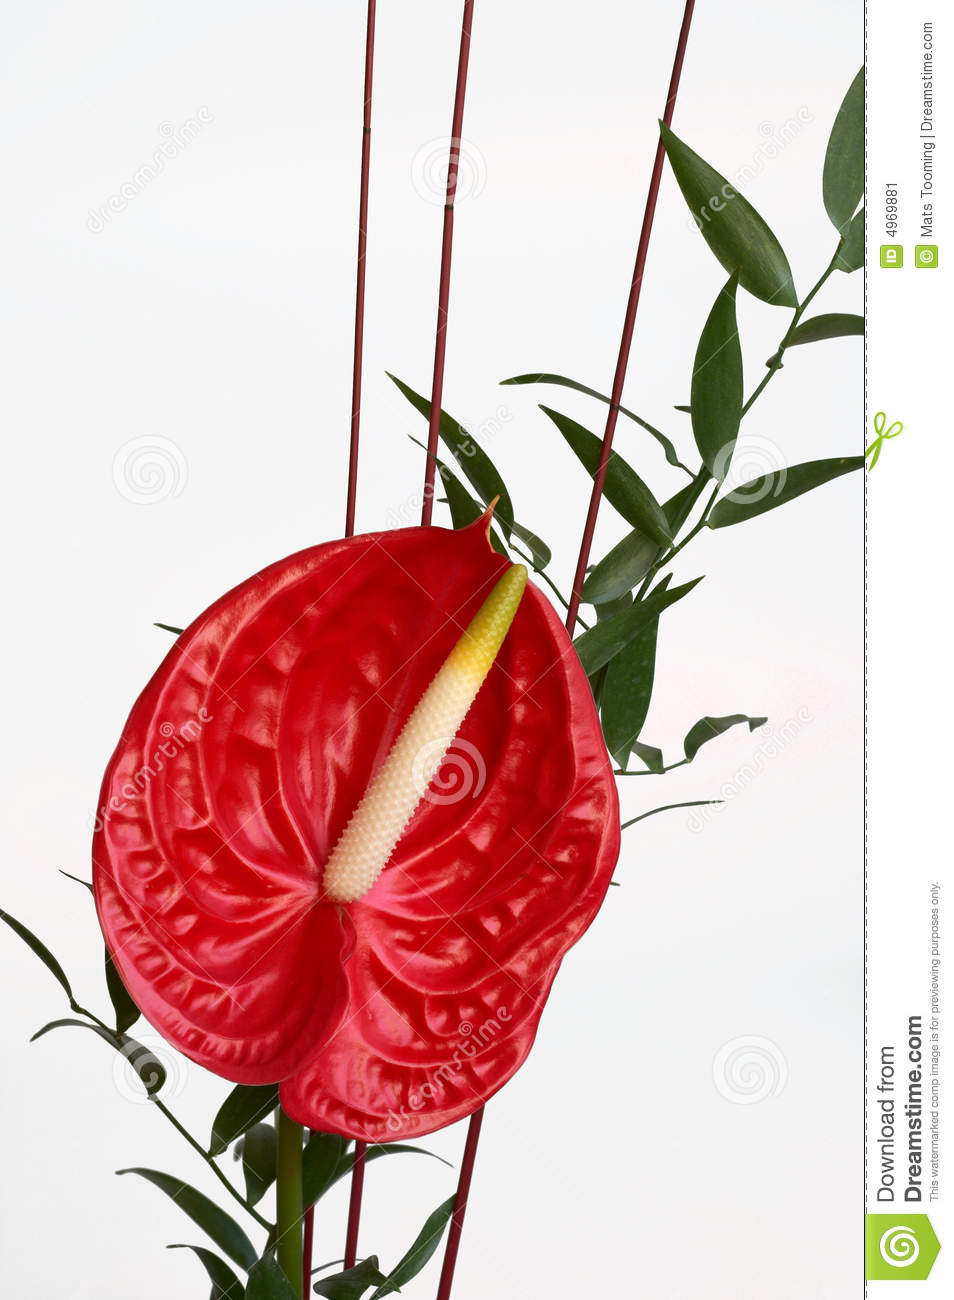 Anthurium clipart #2, Download drawings